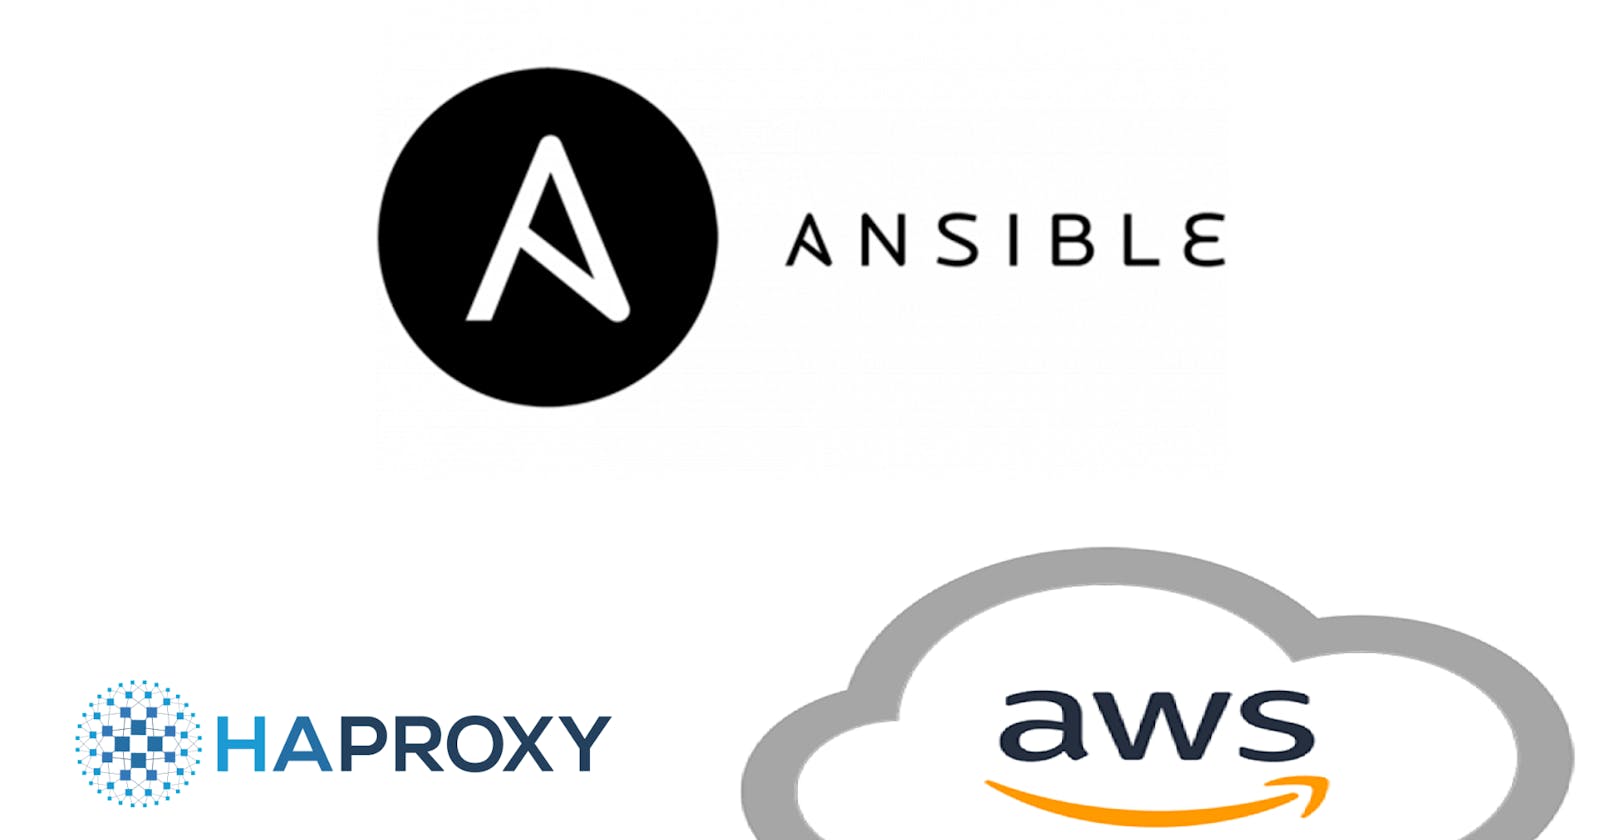 Configuring HAproxy using Ansible for webservers running on AWS